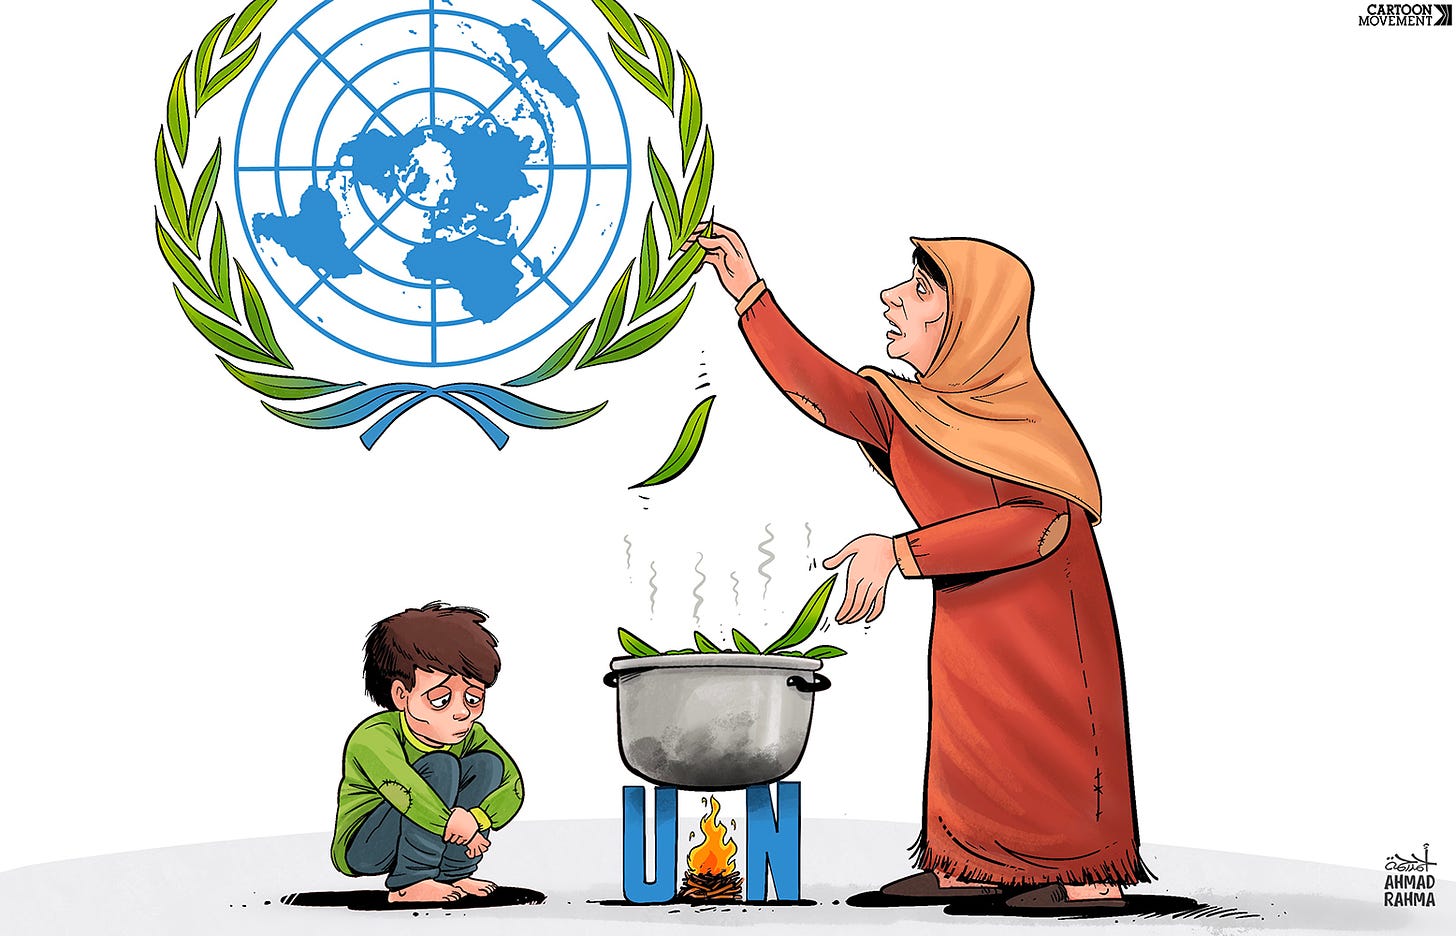 Cartoon showing a Gaza family cooking food. The food they are preparing are the leaves from the laurel wreath that surrounds the logo of the United Nations.